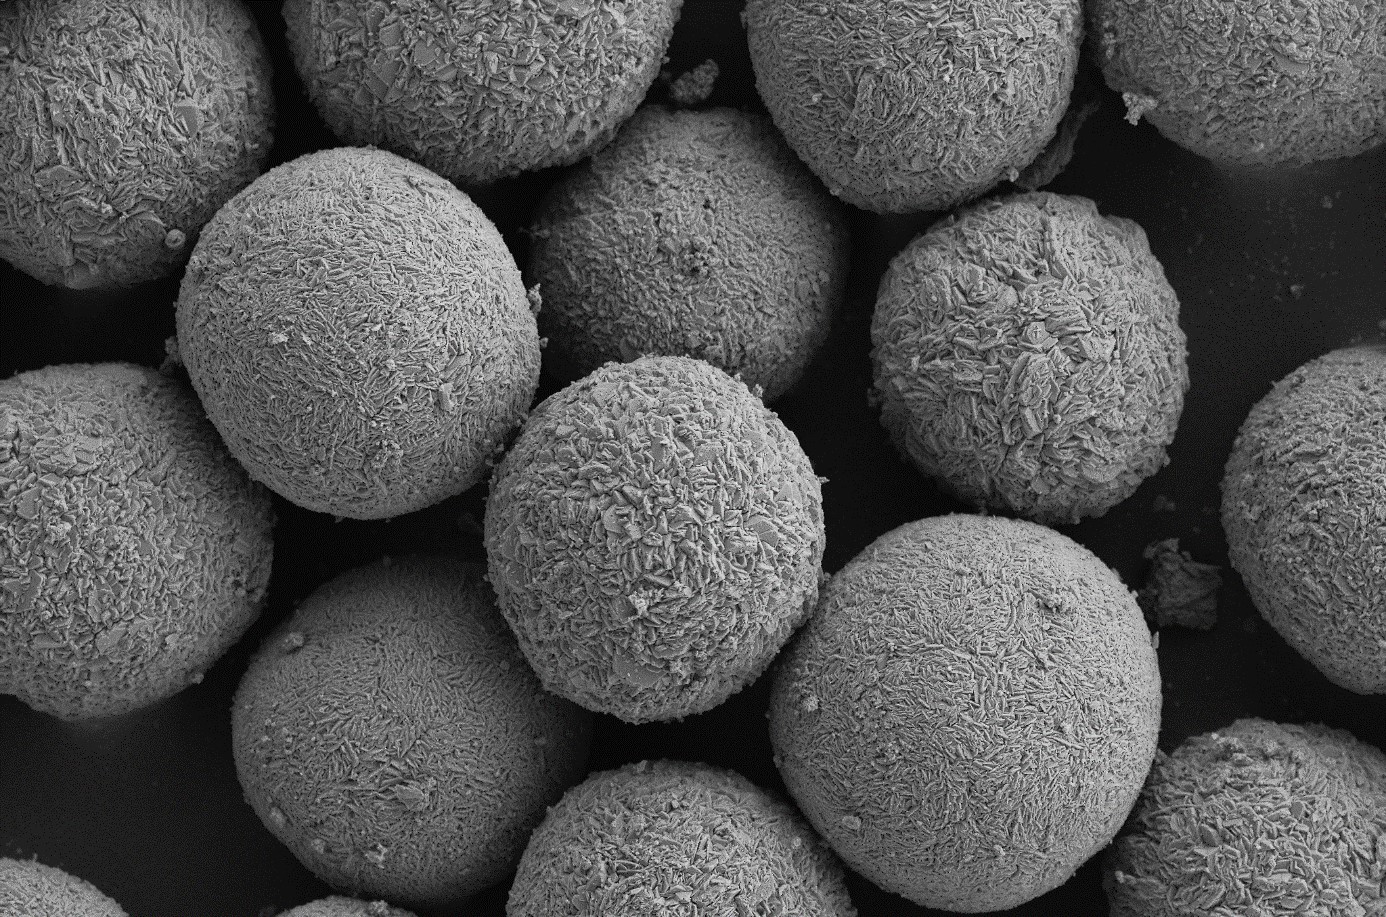 With Powder-Up!, the ZSW is expanding its possibilities for synthesising battery materials up to the 100-kilogram scale. The picture shows a scanning electron microscope image of the particles of a cobalt-free cathode material, produced at ZSW. Photo: ZSW